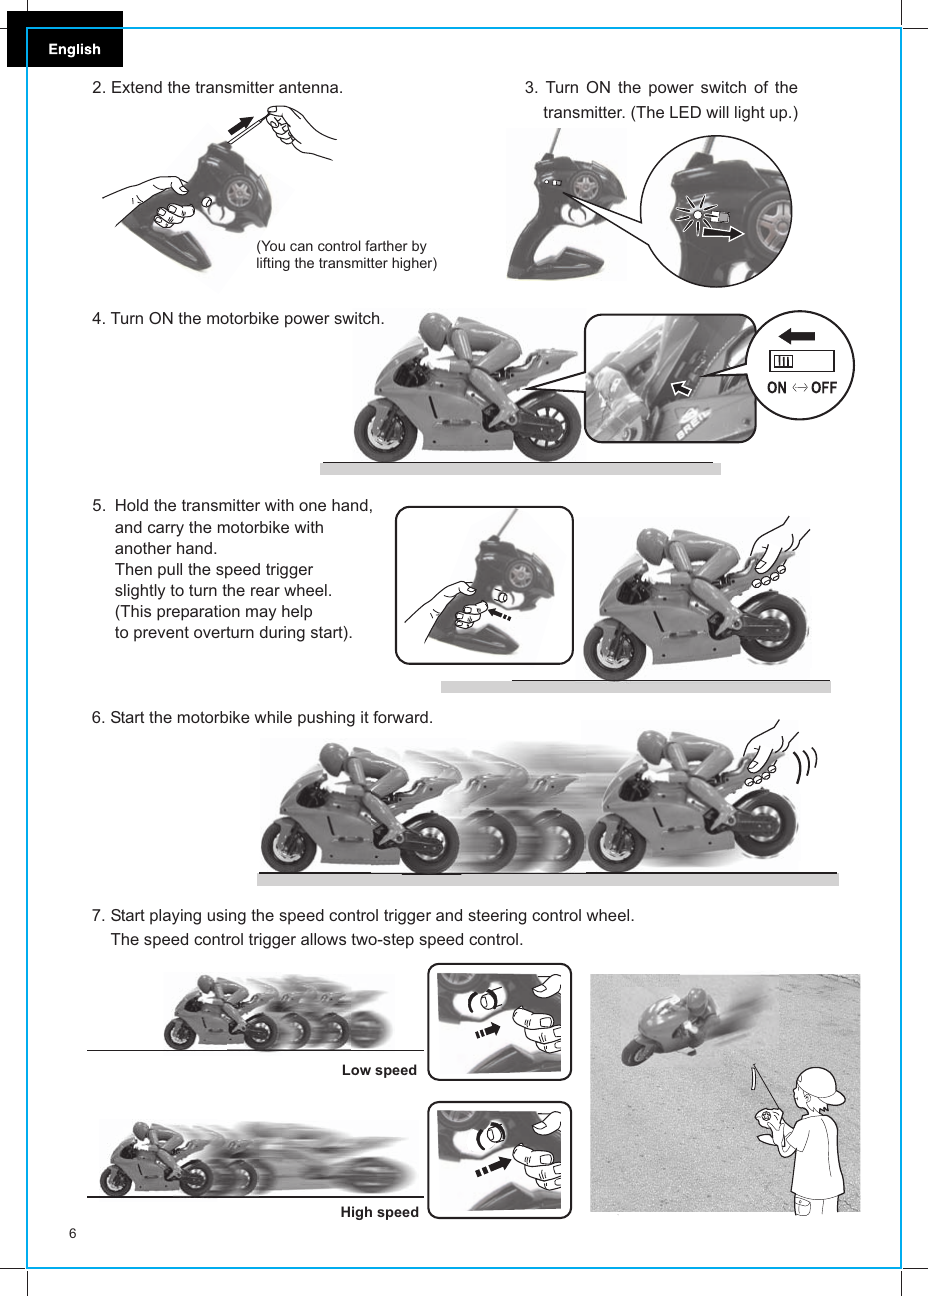 4. Turn ON the motorbike power switch.Hold the transmitter with one hand, and carry the motorbike with another hand. Then pull the speed trigger slightly to turn the rear wheel. (This preparation may helpto prevent overturn during start).Start playing using the speed control trigger and steering control wheel. The speed control trigger allows two-step speed control.7.6. Start the motorbike while pushing it forward.Low speedHigh speed65. 3. Turn ON the power switch of the     transmitter. (The LED will light up.)2. Extend the transmitter antenna.(You can control farther by lifting the transmitter higher)